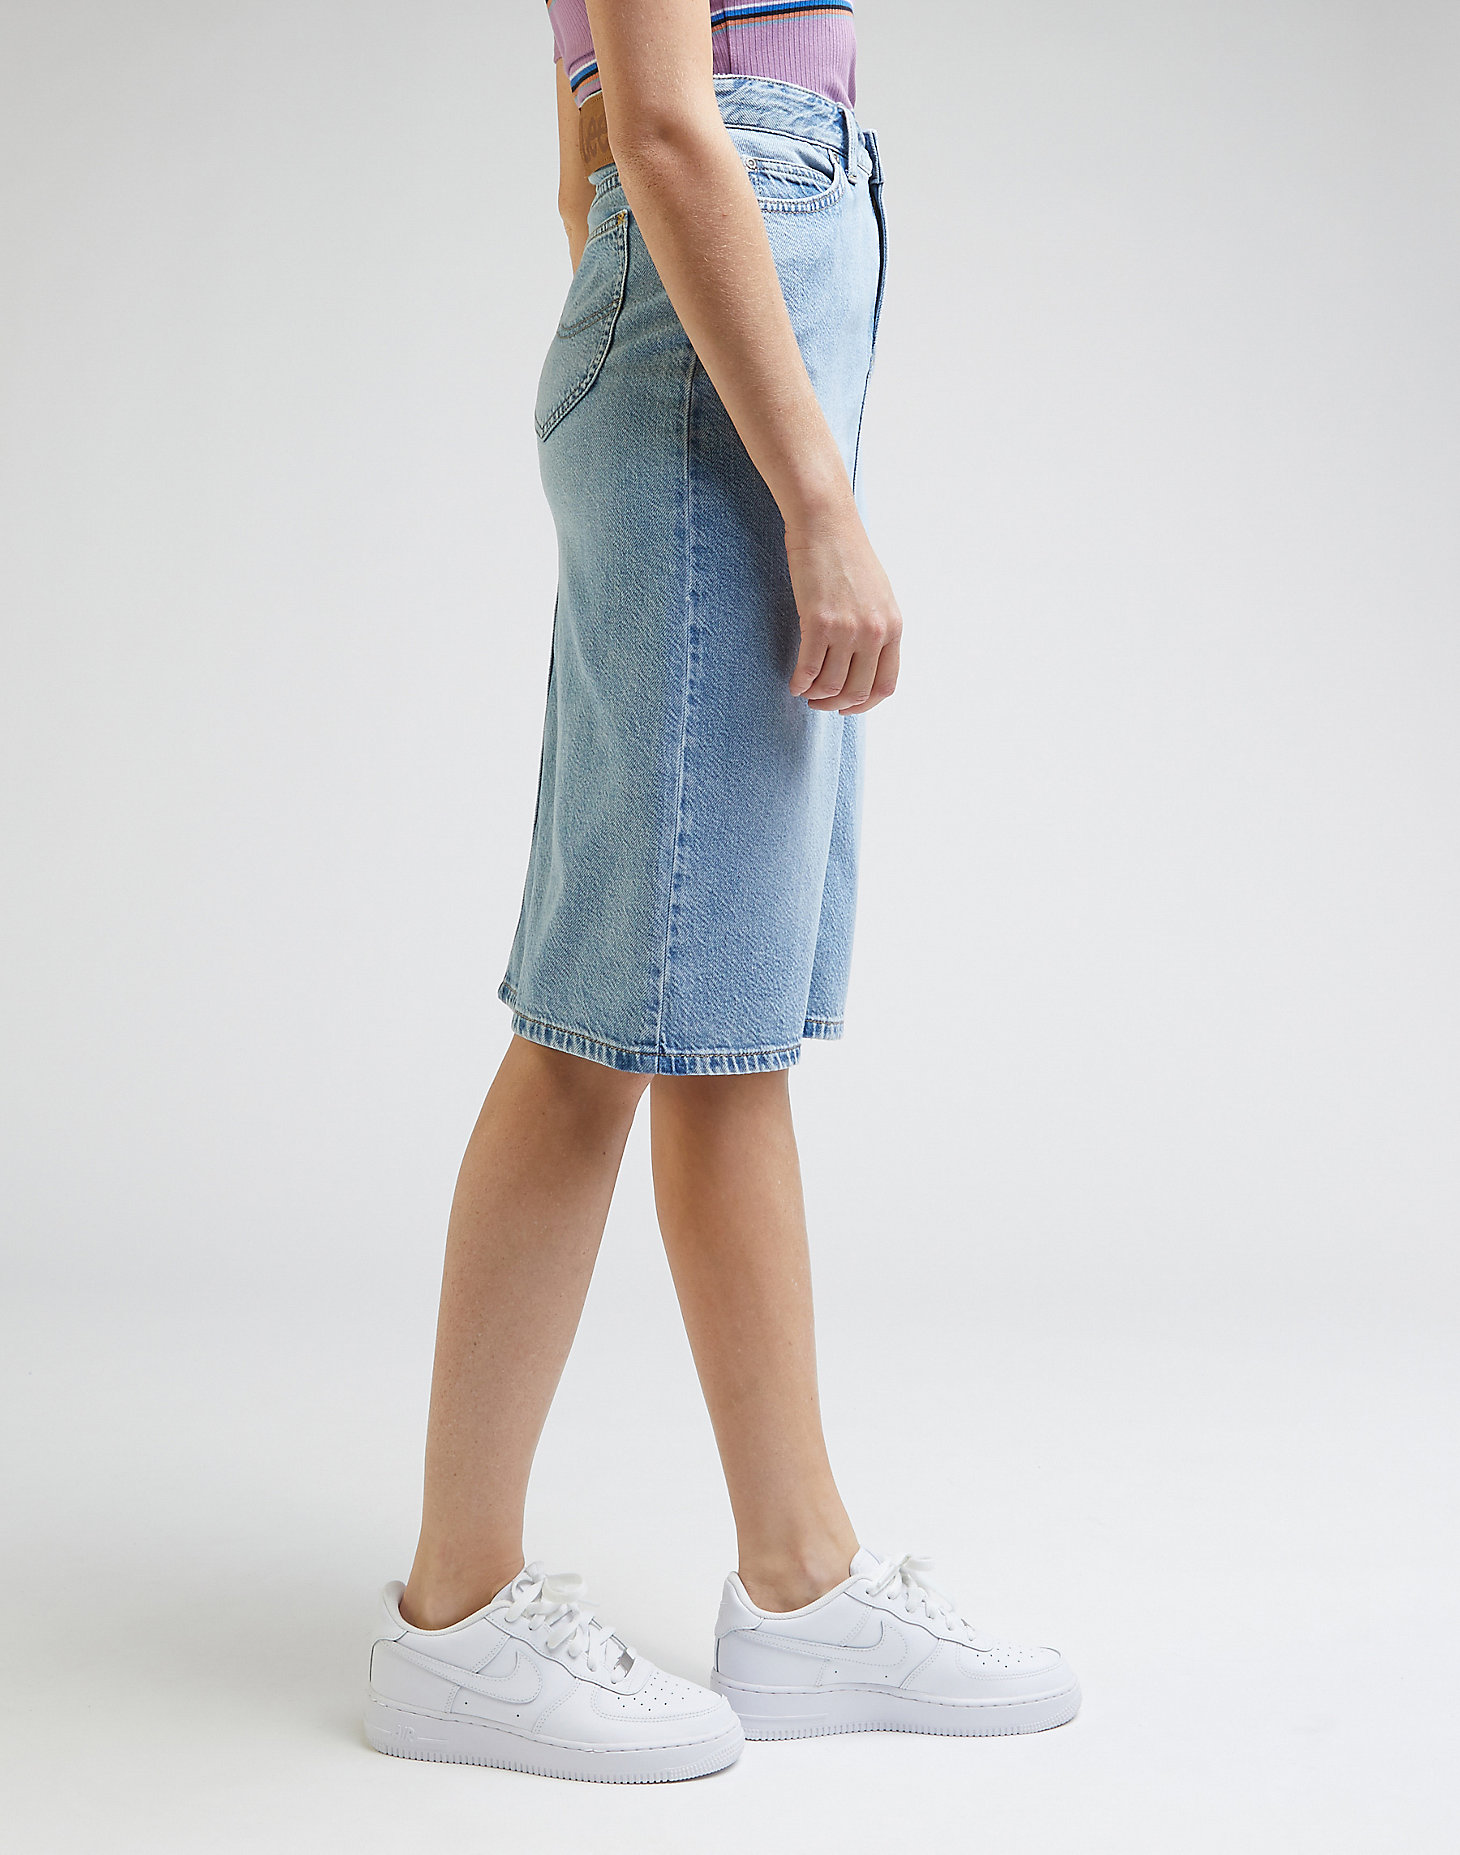 Midi Skirt in Frosted Blue alternative view 3